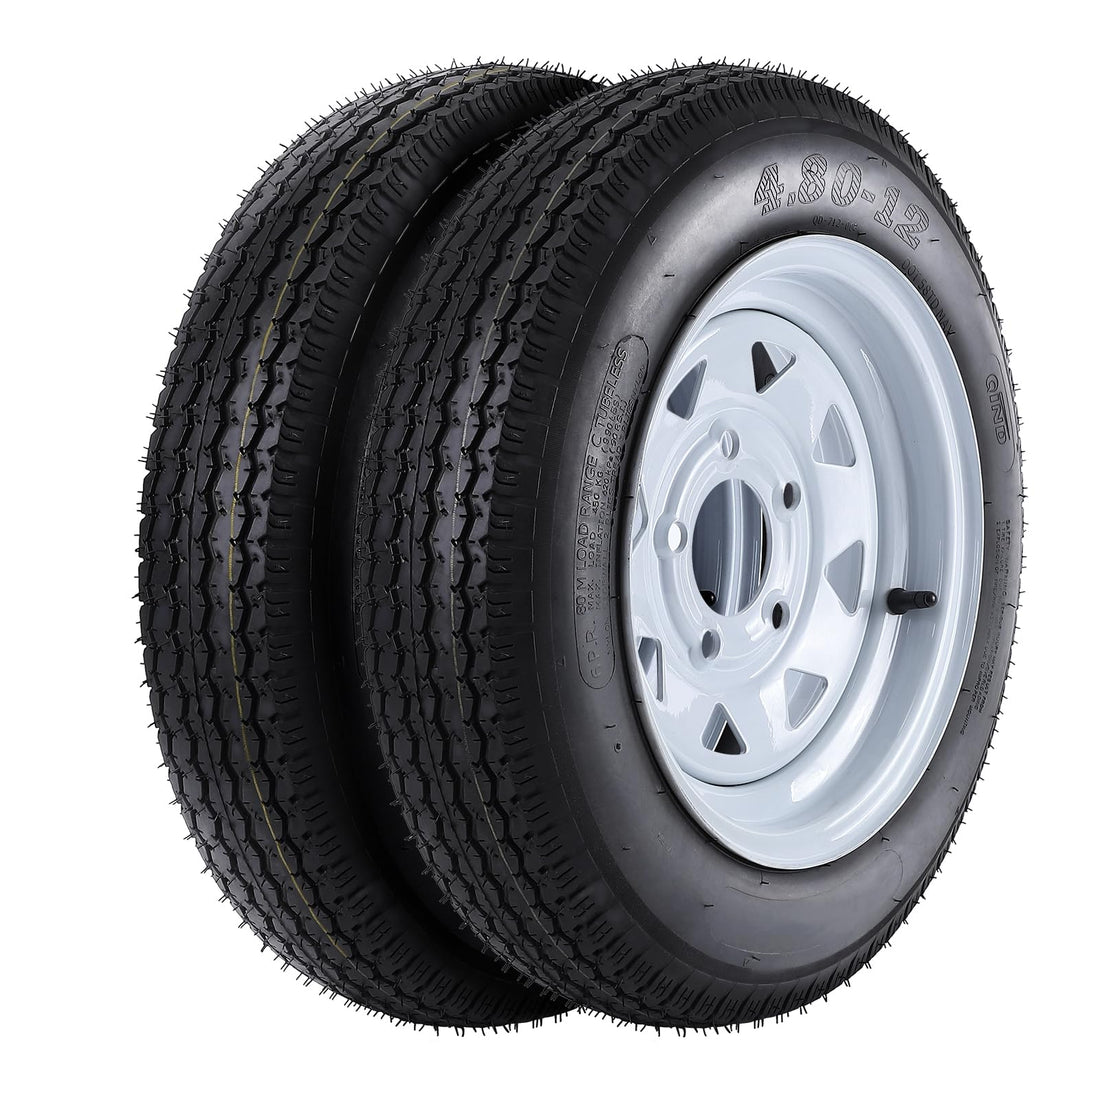 480-12 4.80x12 Trailer Tires 2Pk, 12" Rims for Stability